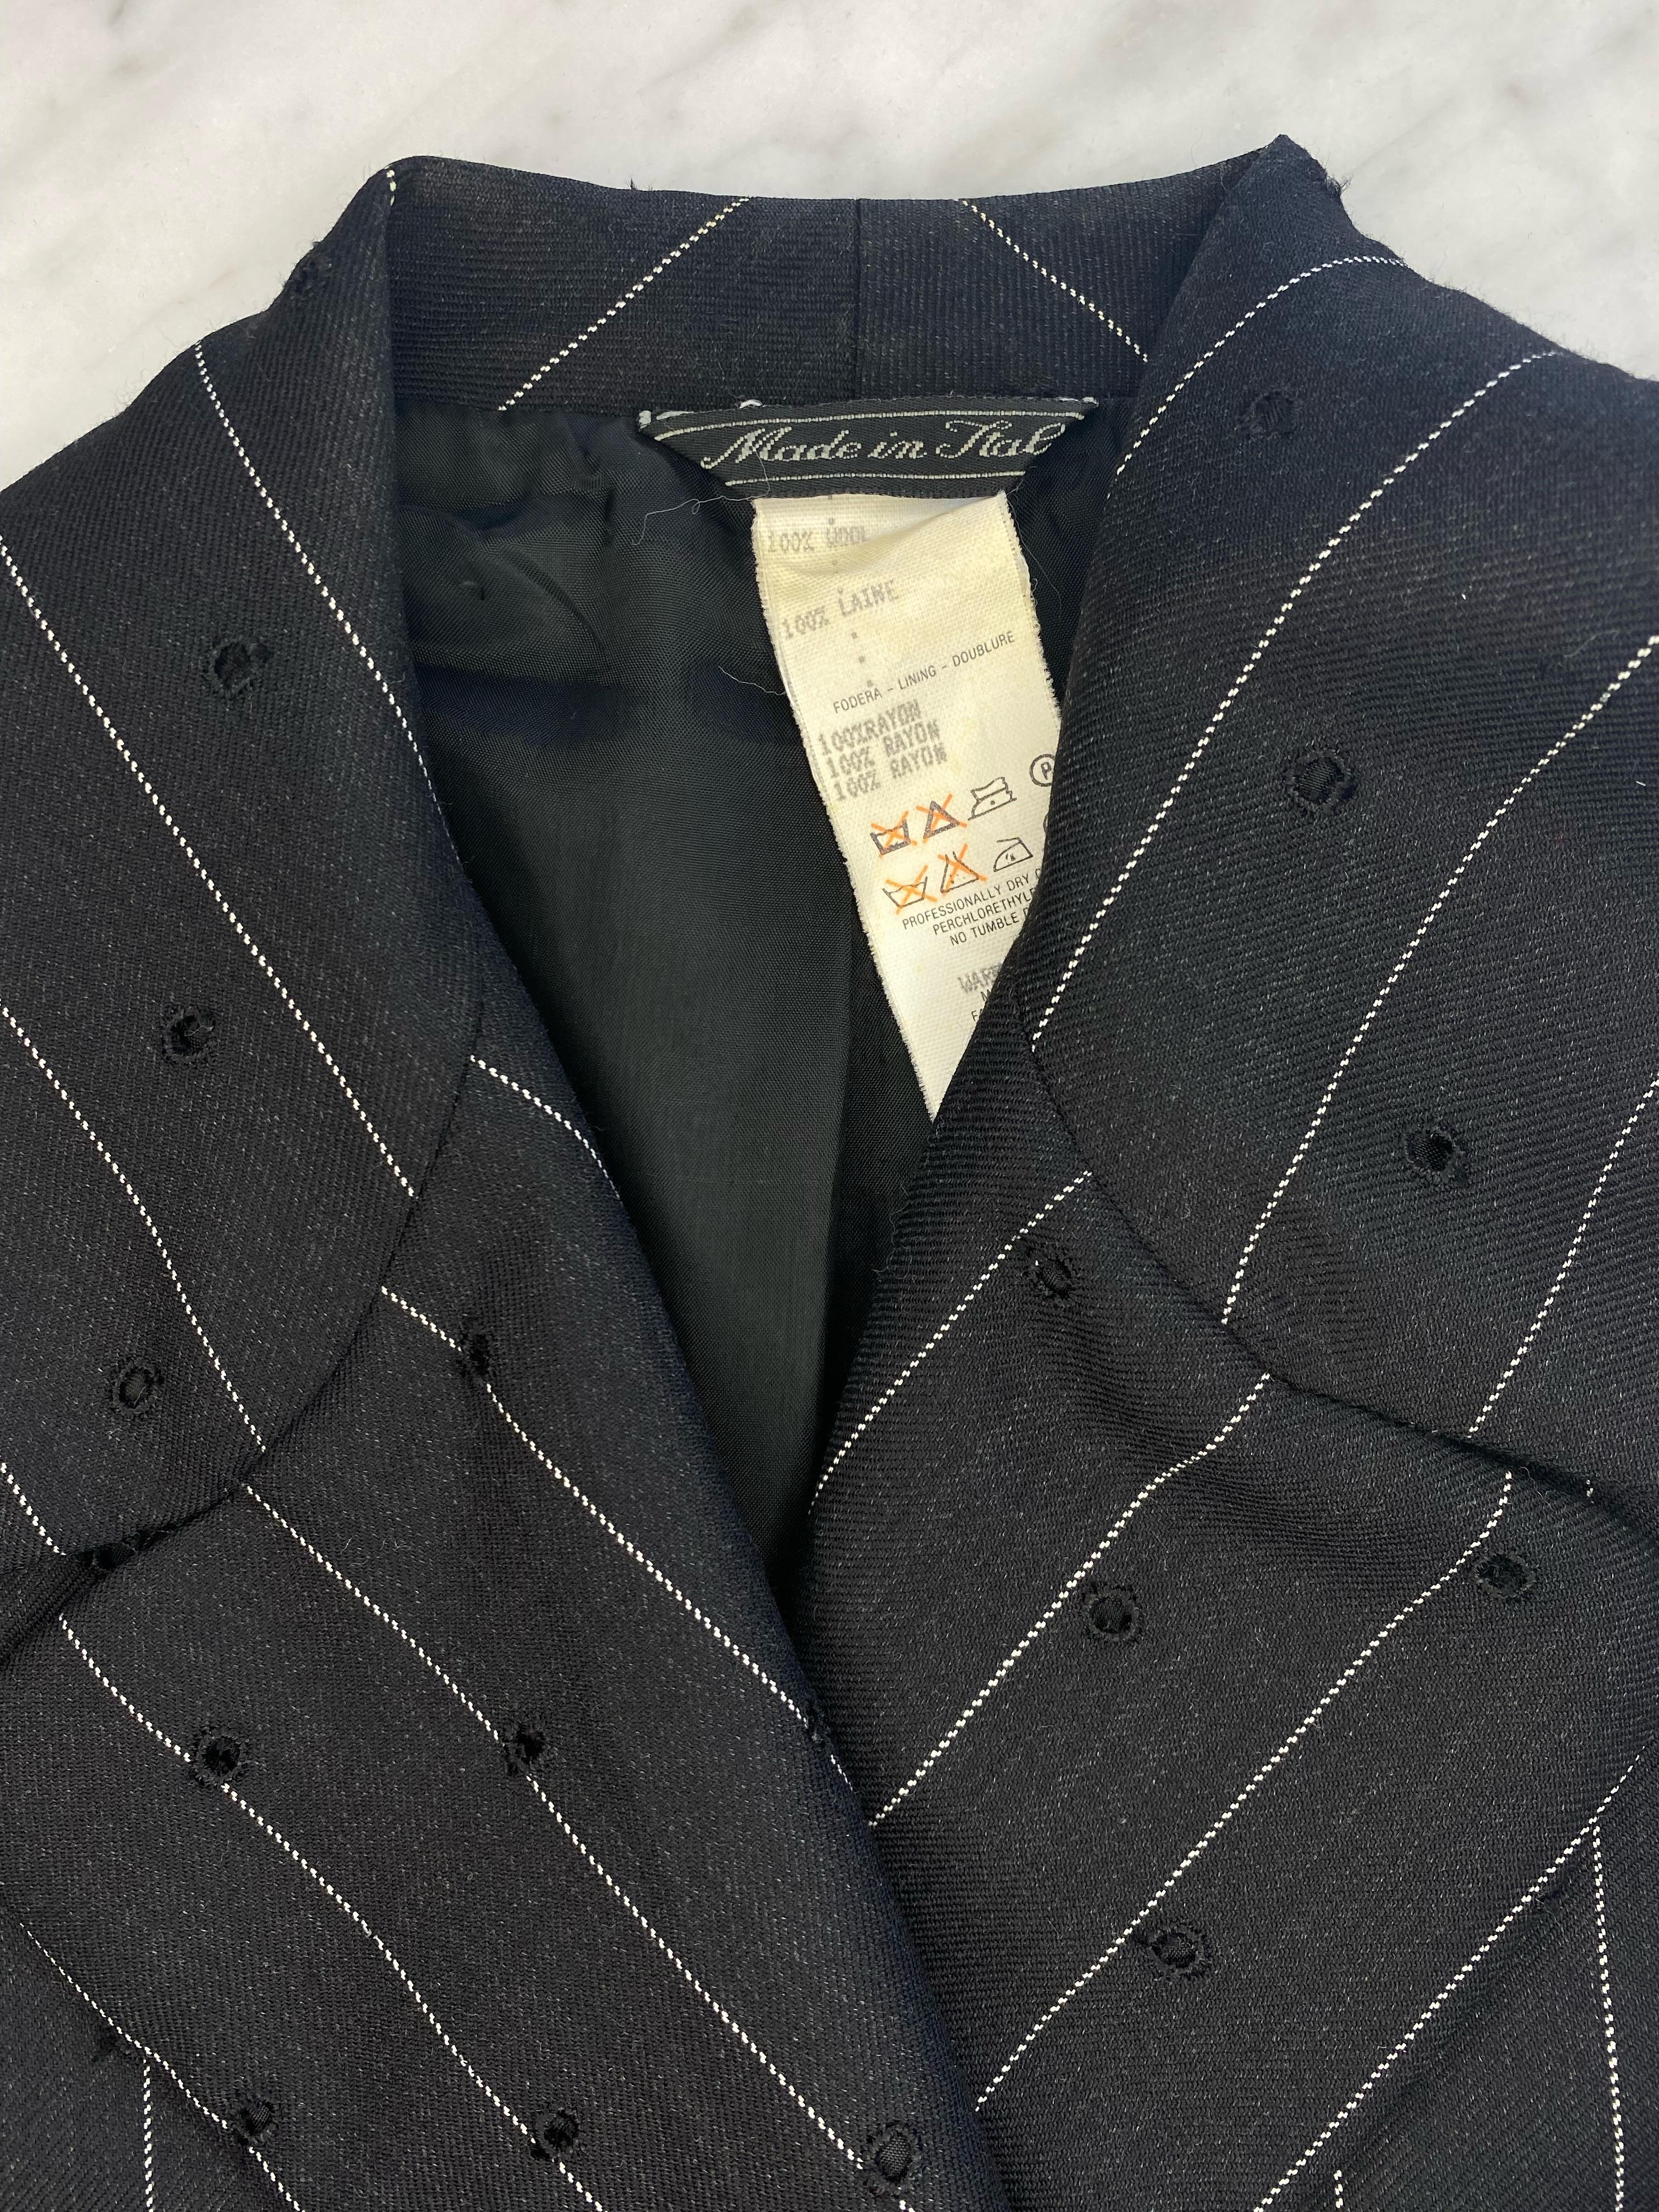 S/S 1994 Gianni Versace Couture Perforated Punk Pinstripe Medusa Wool Blazer In Good Condition For Sale In West Hollywood, CA